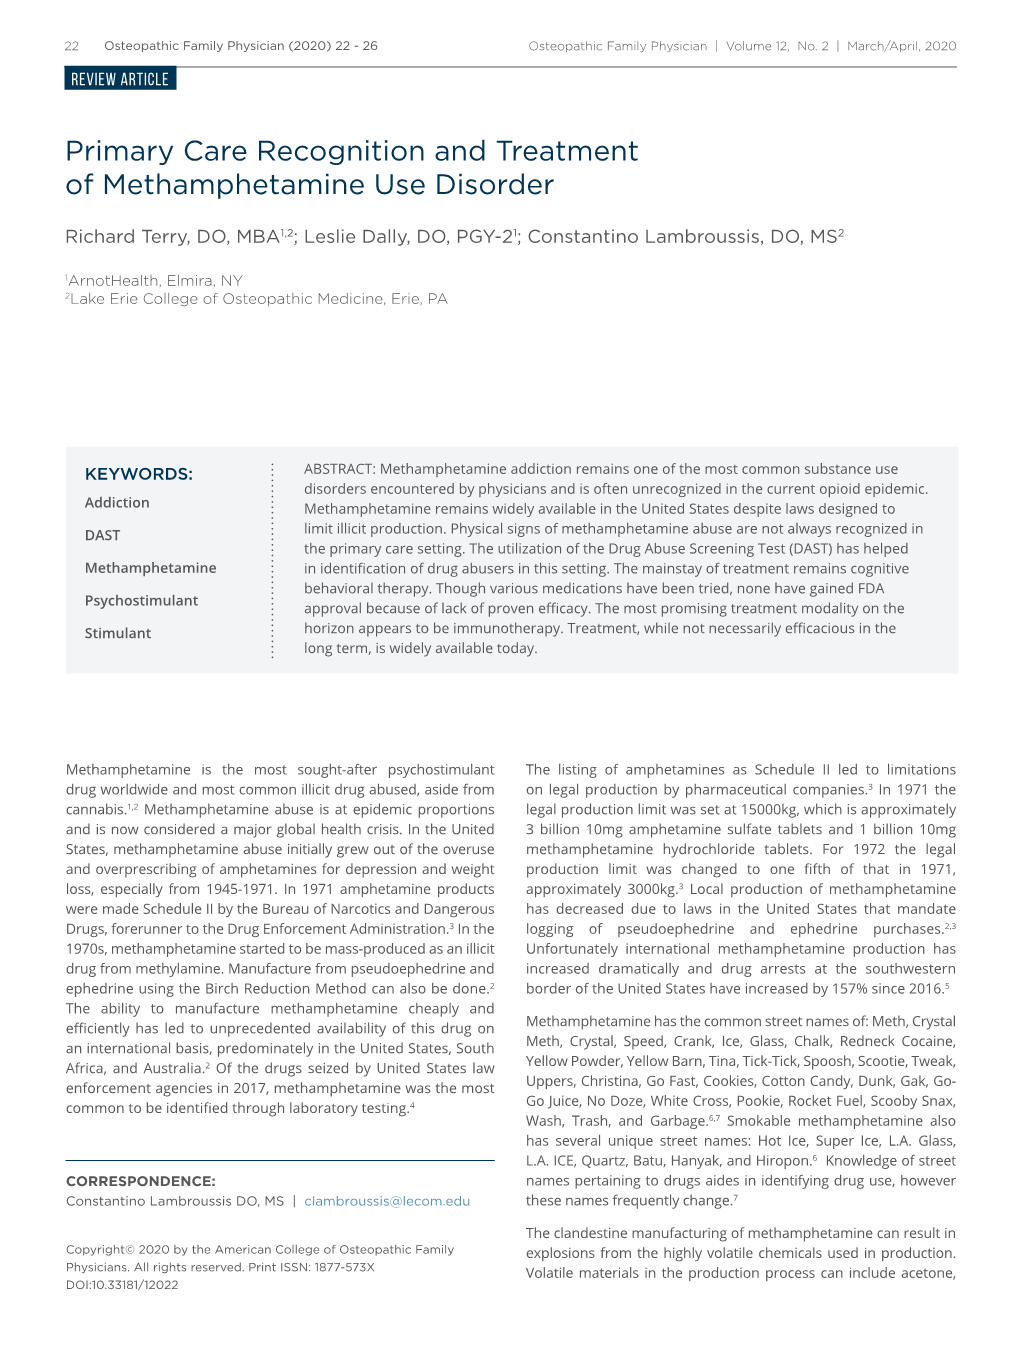 Primary Care Recognition and Treatment of Methamphetamine Use Disorder